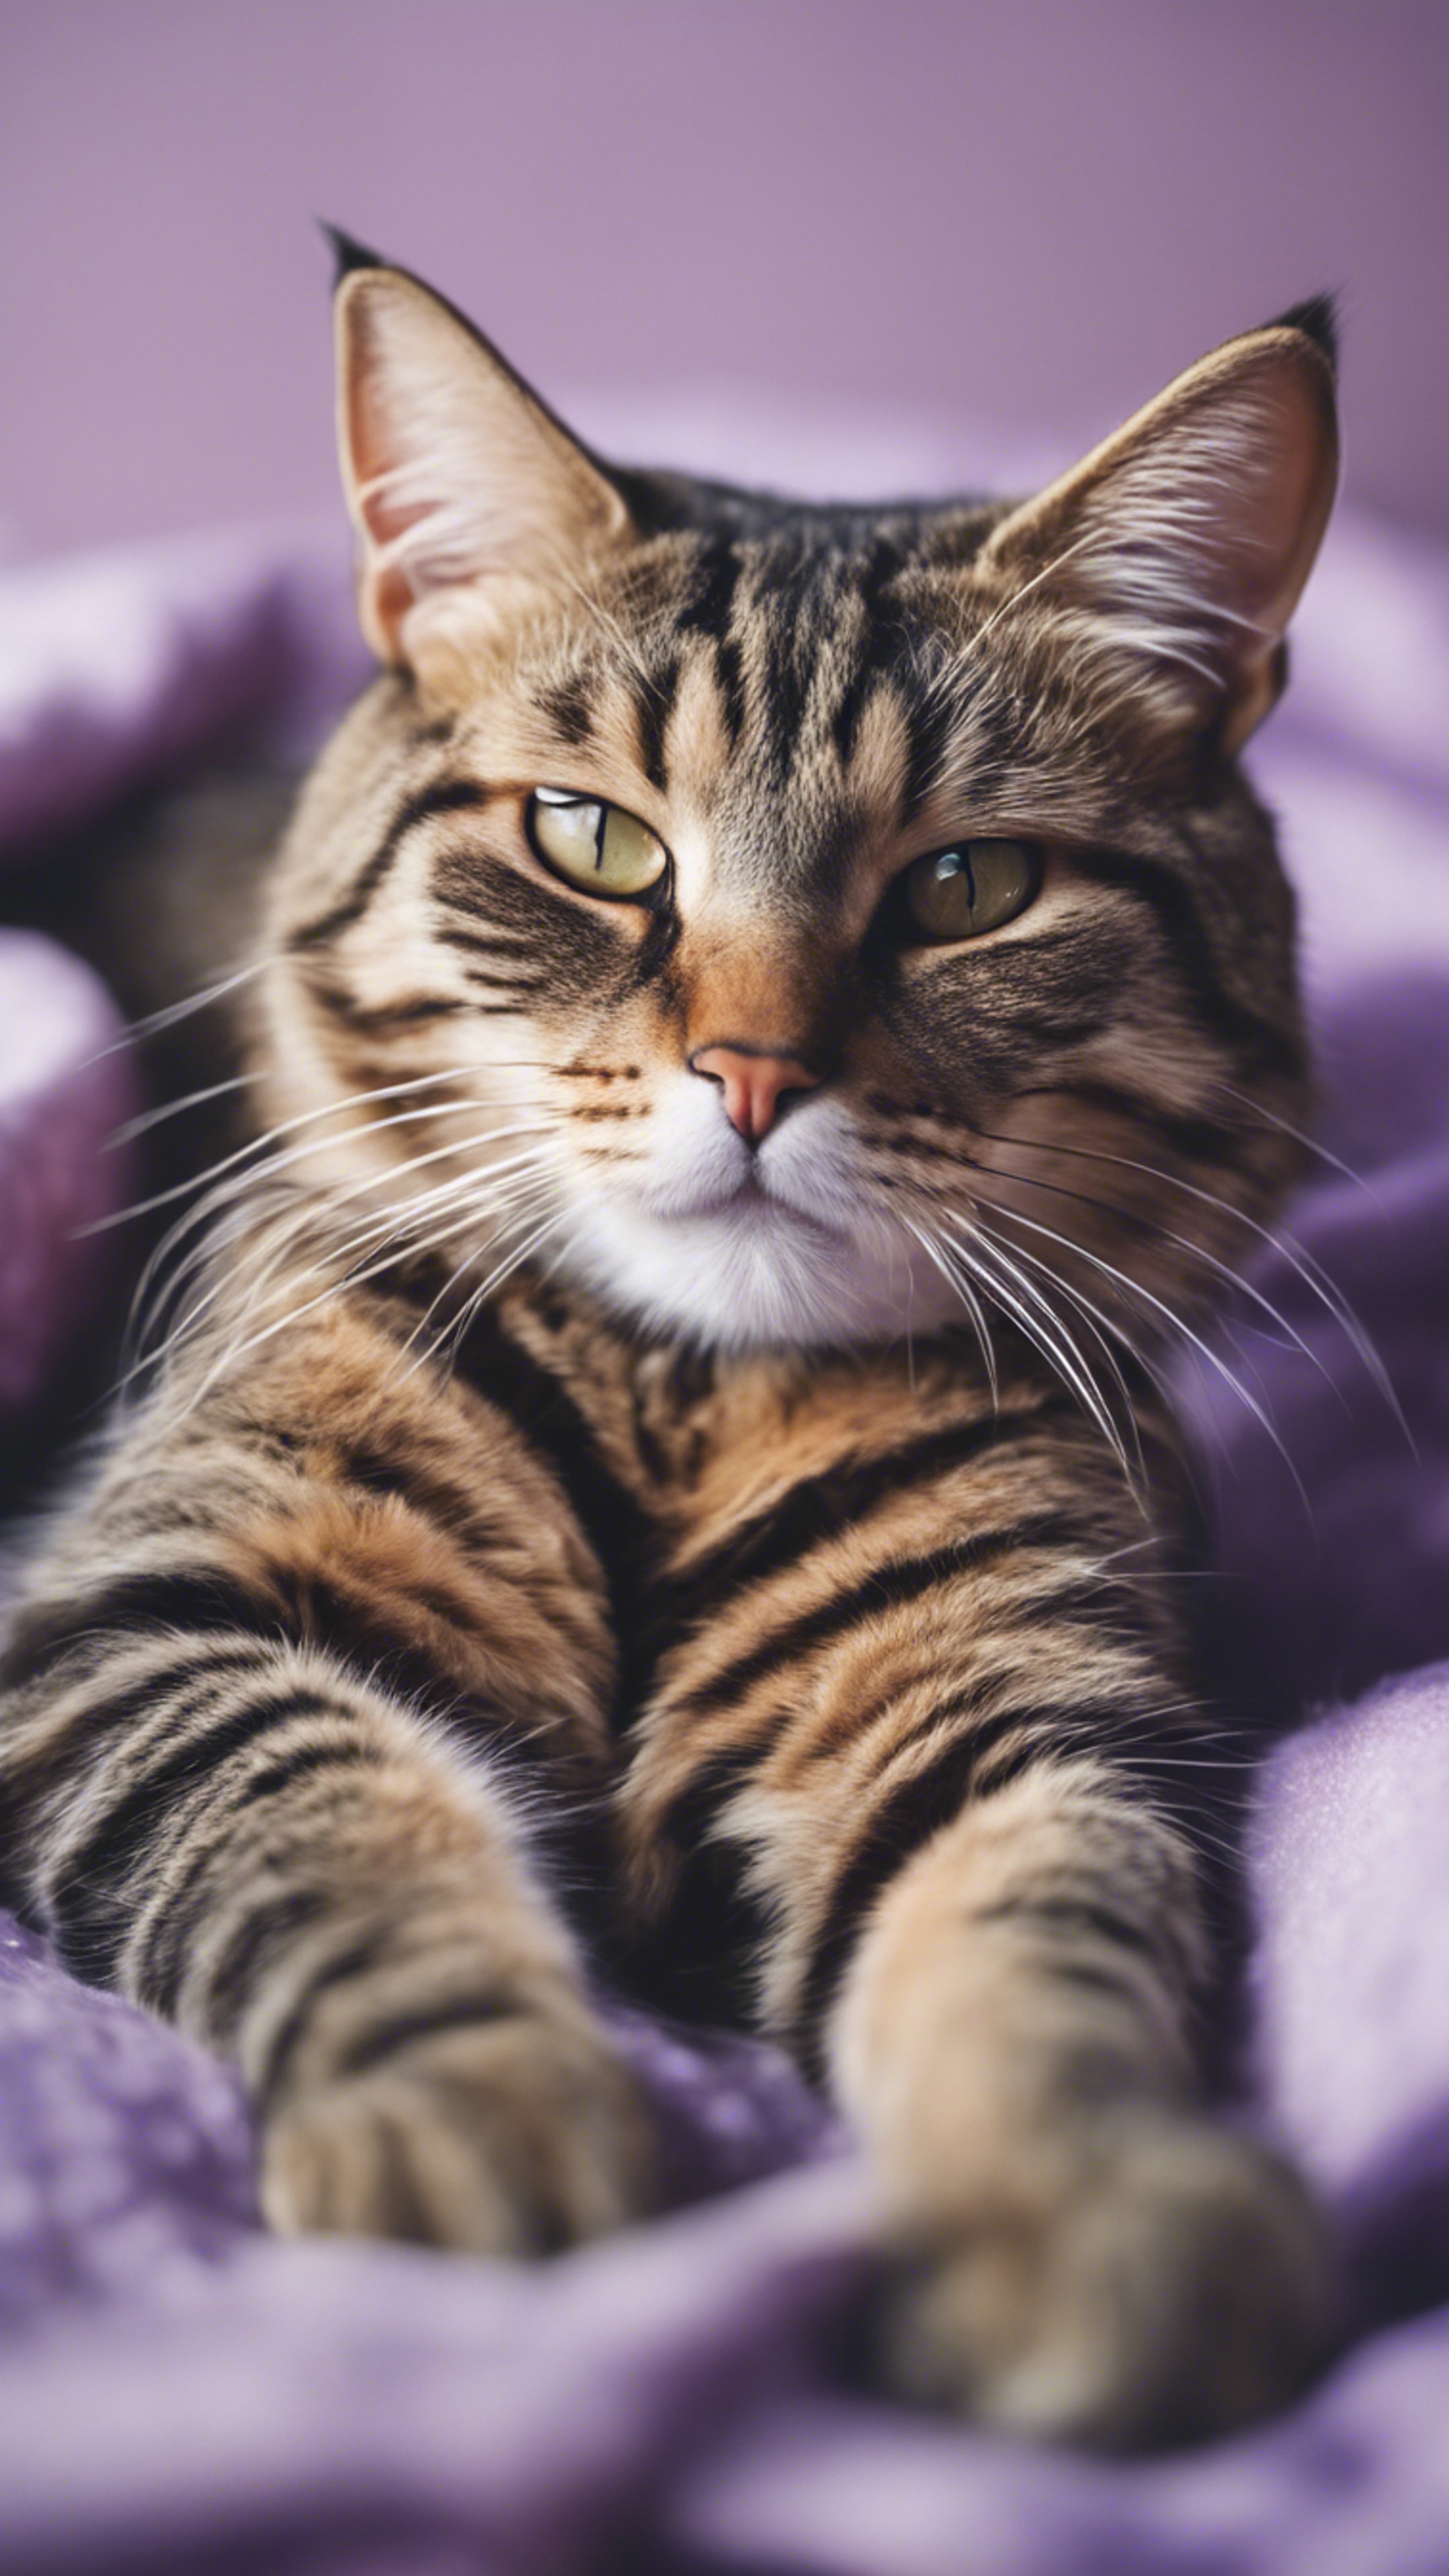 A candid portrait of a tabby cat lounging on a pastel purple blanket. Tapeet[f4cf510d1a1d426195dc]